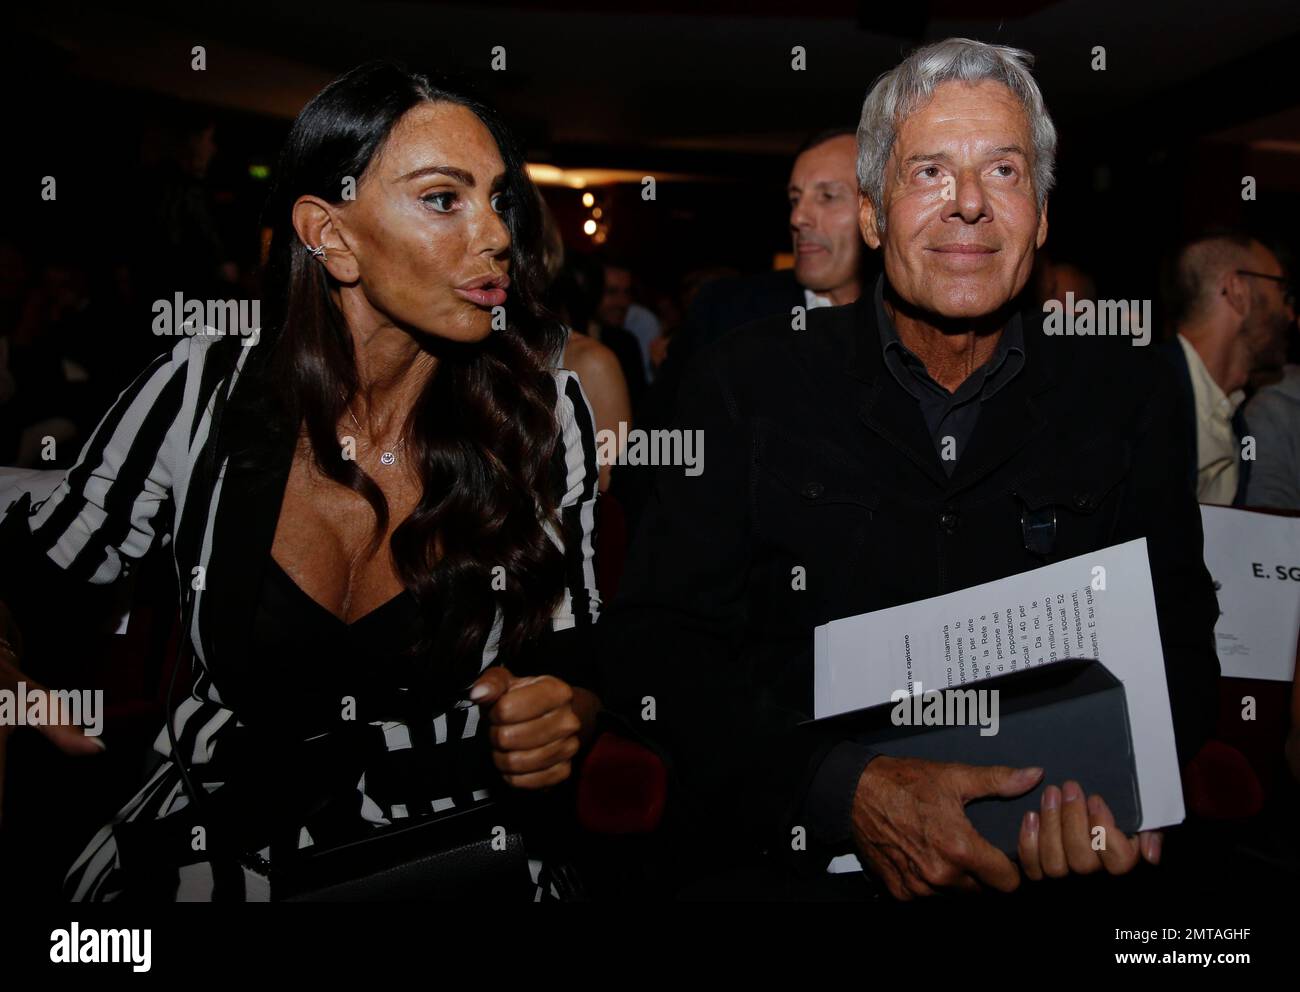 Italian singer Claudio Baglioni, is flanked by his partner Rossella  Barattolo as they attend 'La Milanesiana' cultural event, in Milan, Italy,  Thursday, June 29, 2017. (AP Photo/Luca Bruno Stock Photo - Alamy